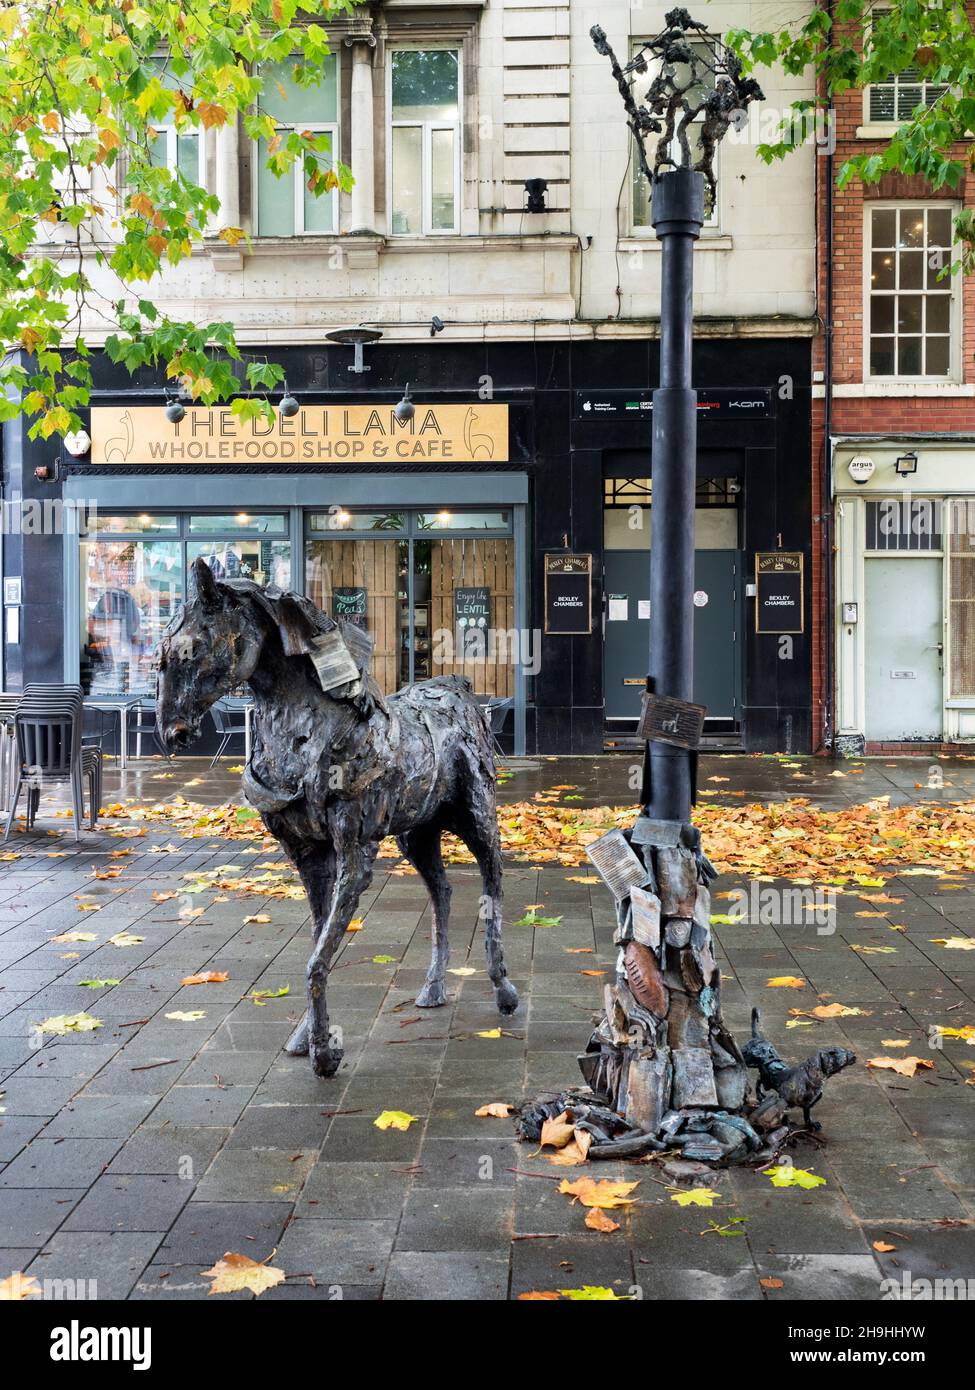 Bronze horse sculpture by Emma Rodgers depicting Salfords pioneering history in Bexley Square Salford Greater Manchester England Stock Photo